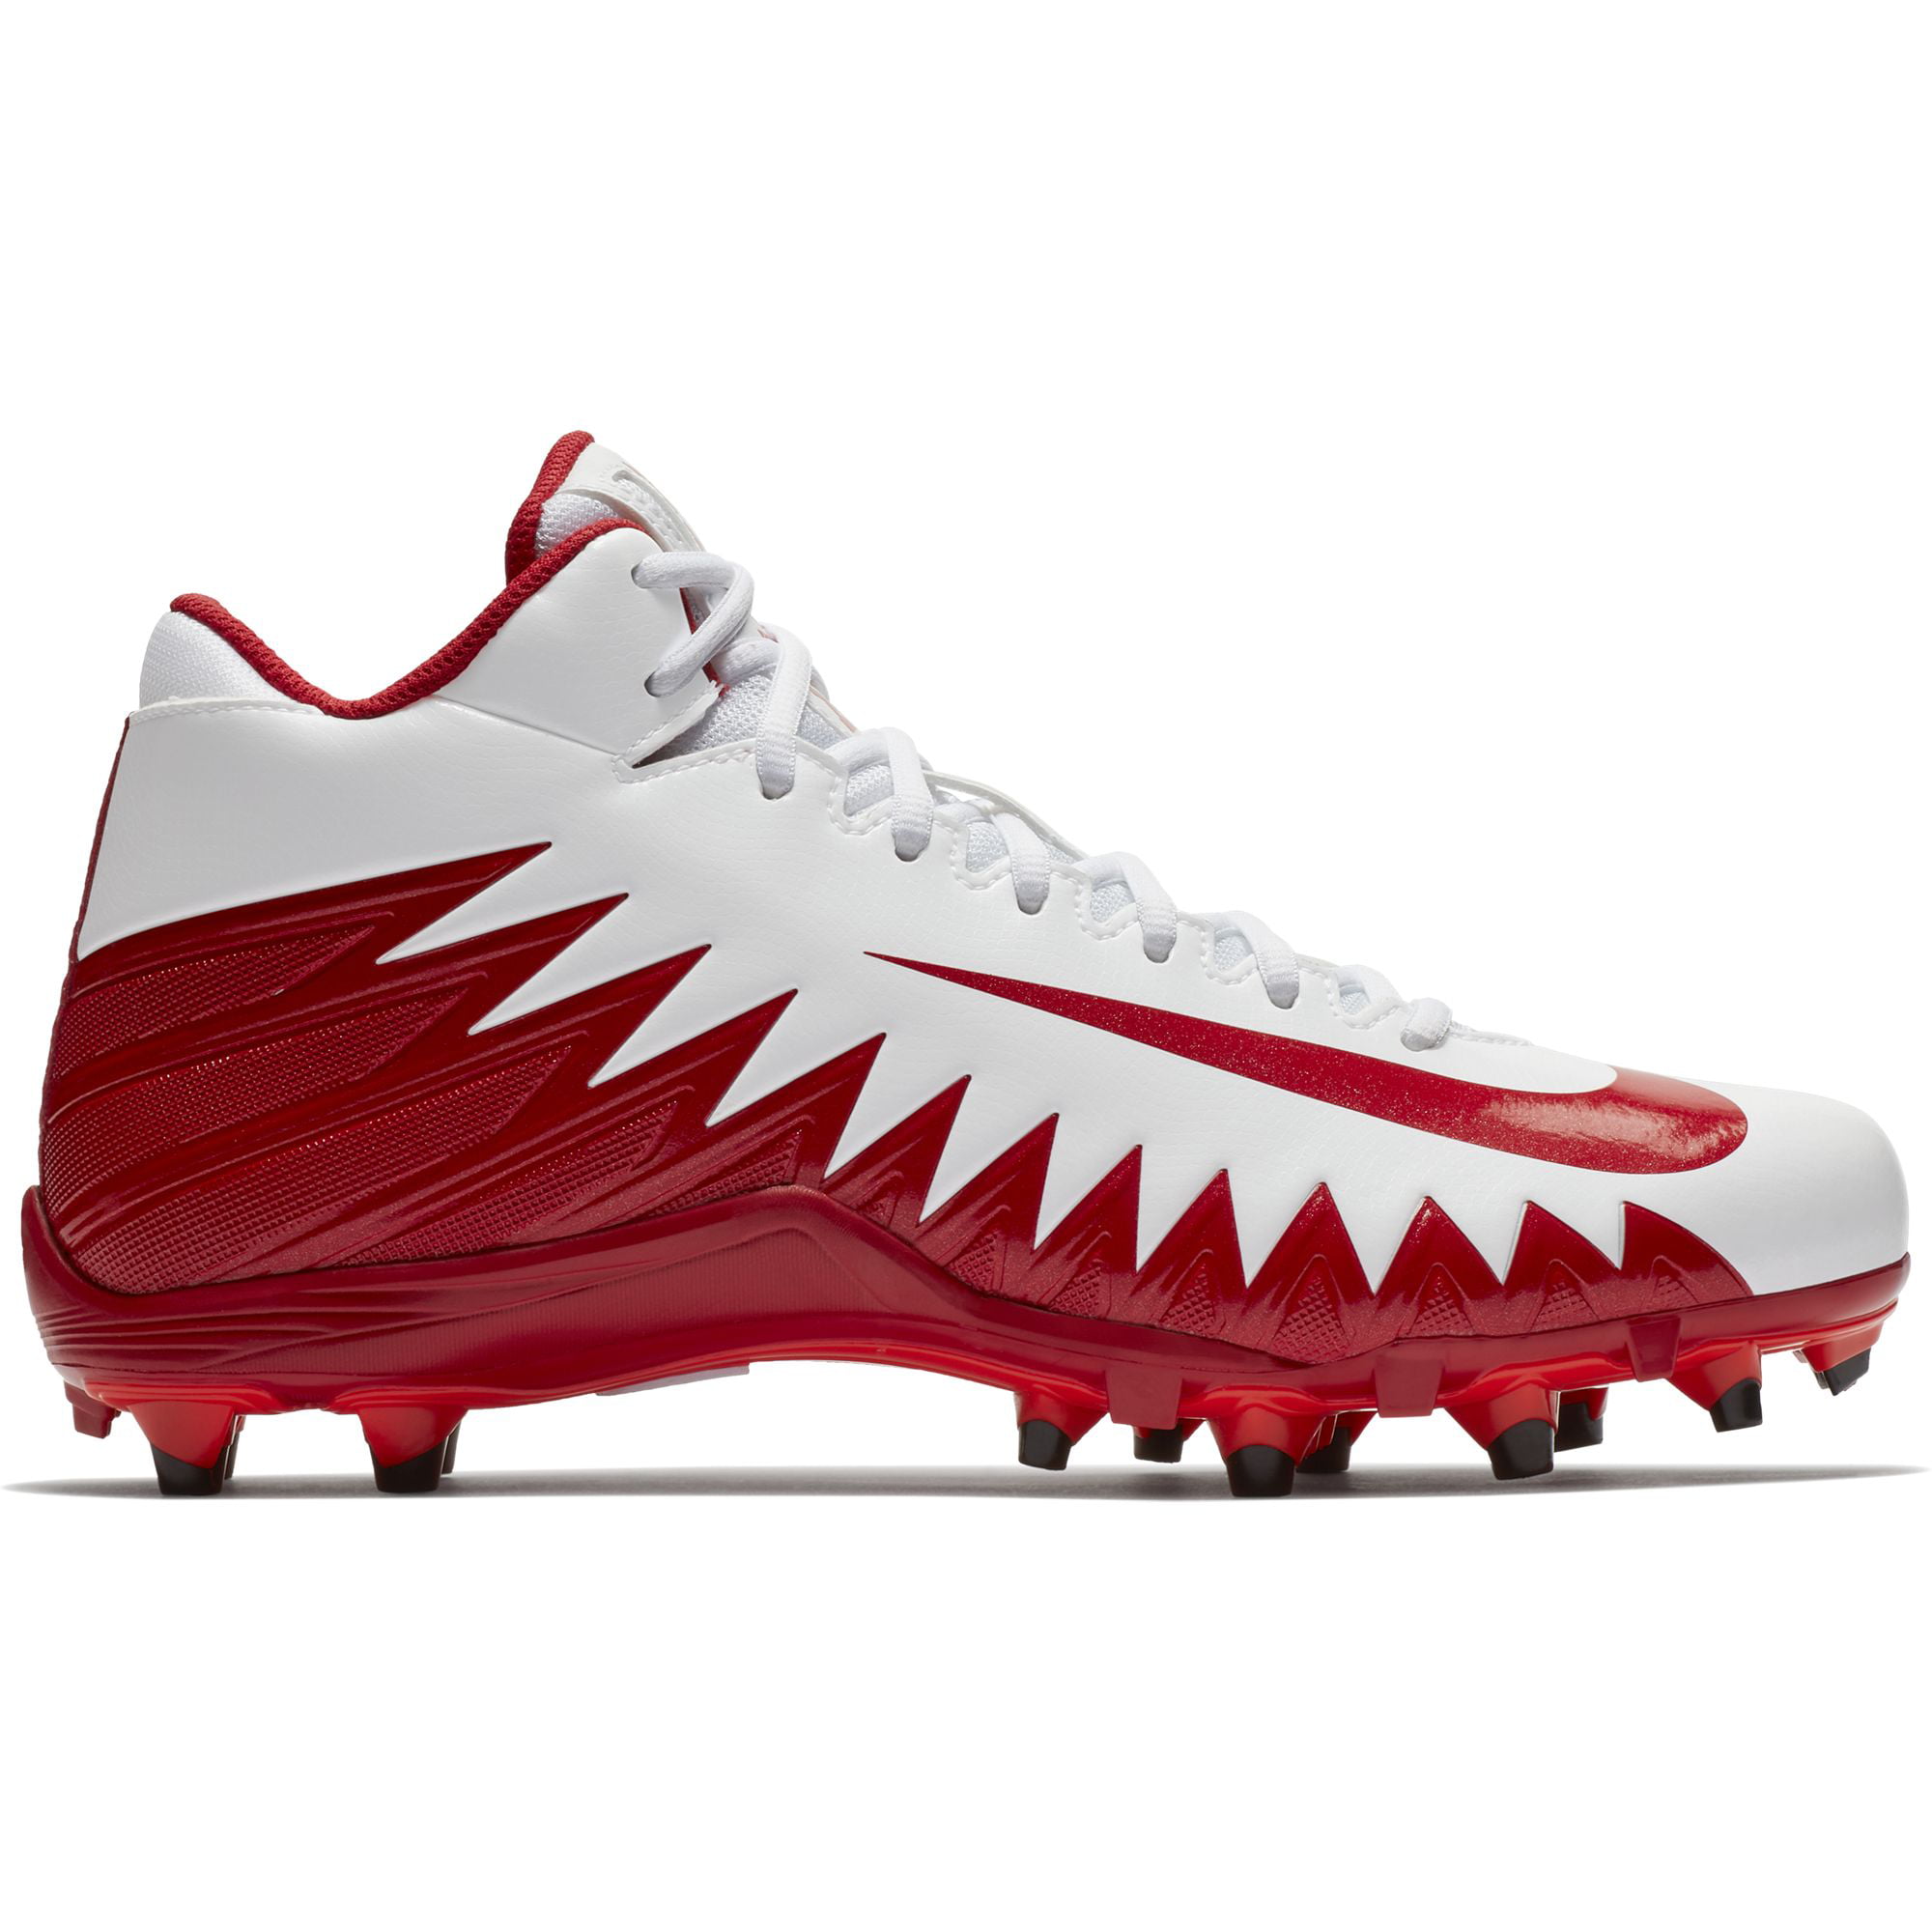 New Men's Sports Football Boots Studs Shoes Outdoor Alpha Leather Red White 